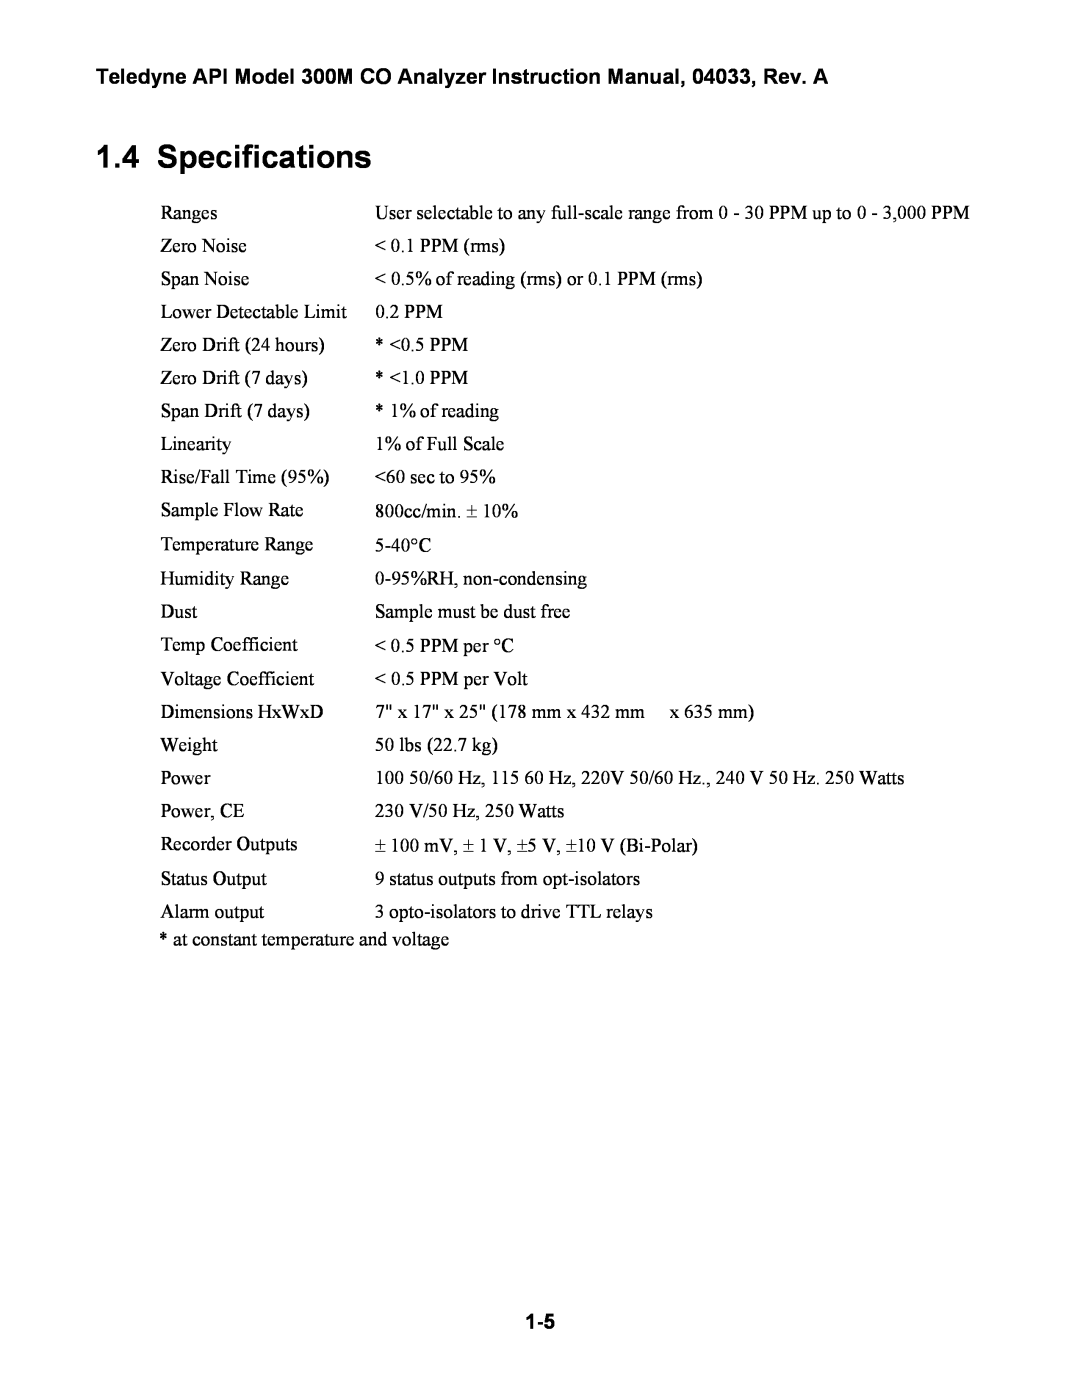 Teledyne 300M instruction manual Specifications 